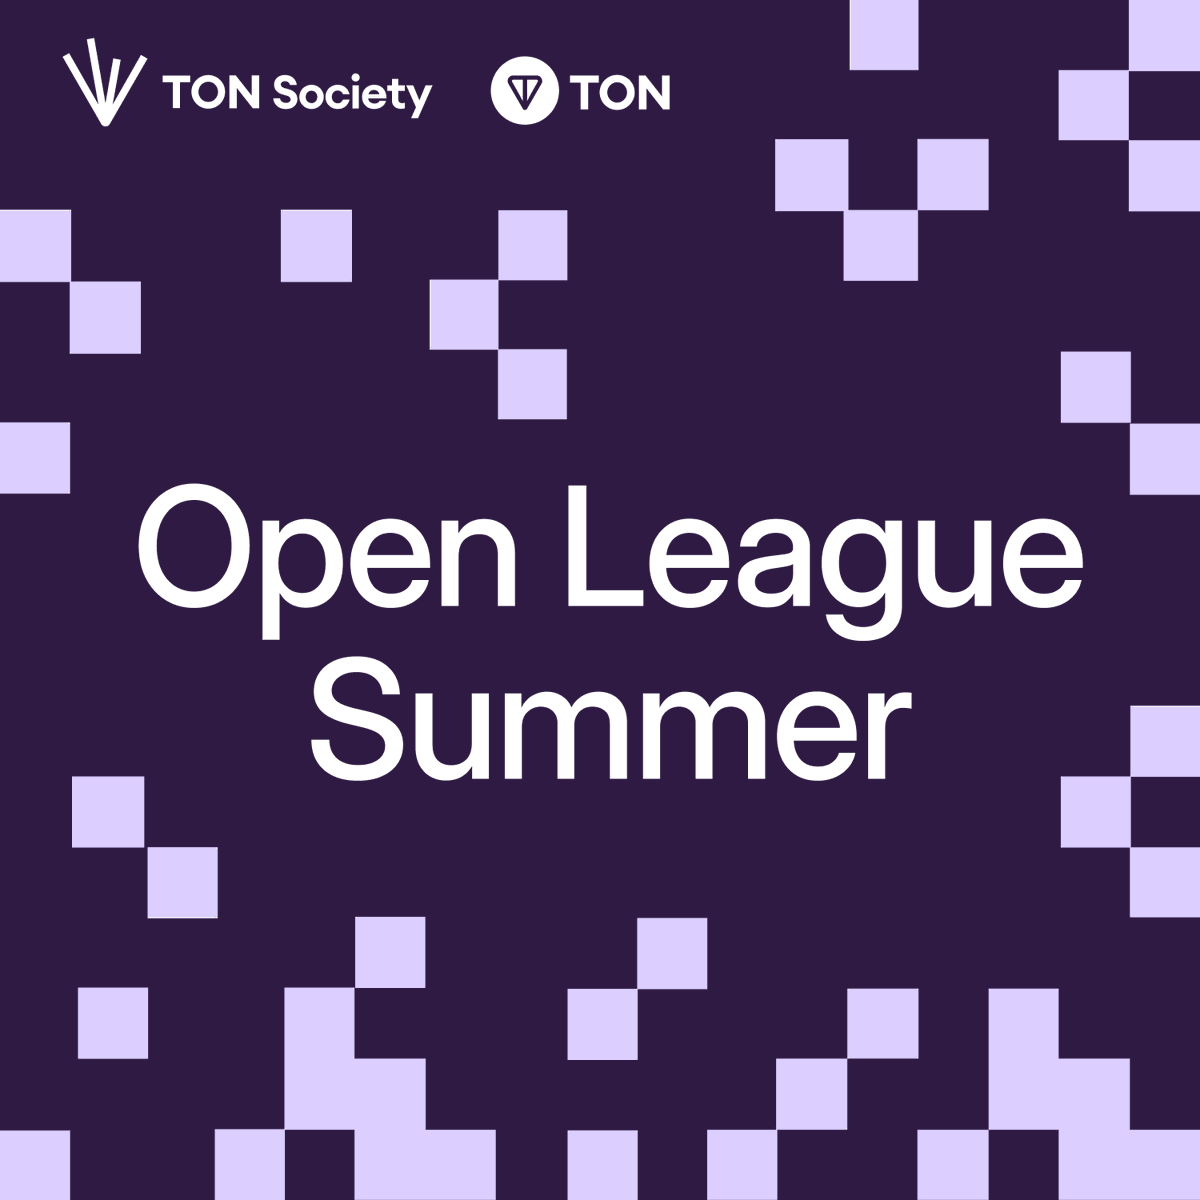 Introducing: Open League Summer 😎💎 13 IRL Bootcamps. 13 Cities. 1 massive hackathon with $2M in rewards. 1 ecosystem-wide massive rewards competition to win a share of Open League’s $200M rewards. 💰 The Goal? 1,000 New Telegram Mini Apps for you, TON Community!